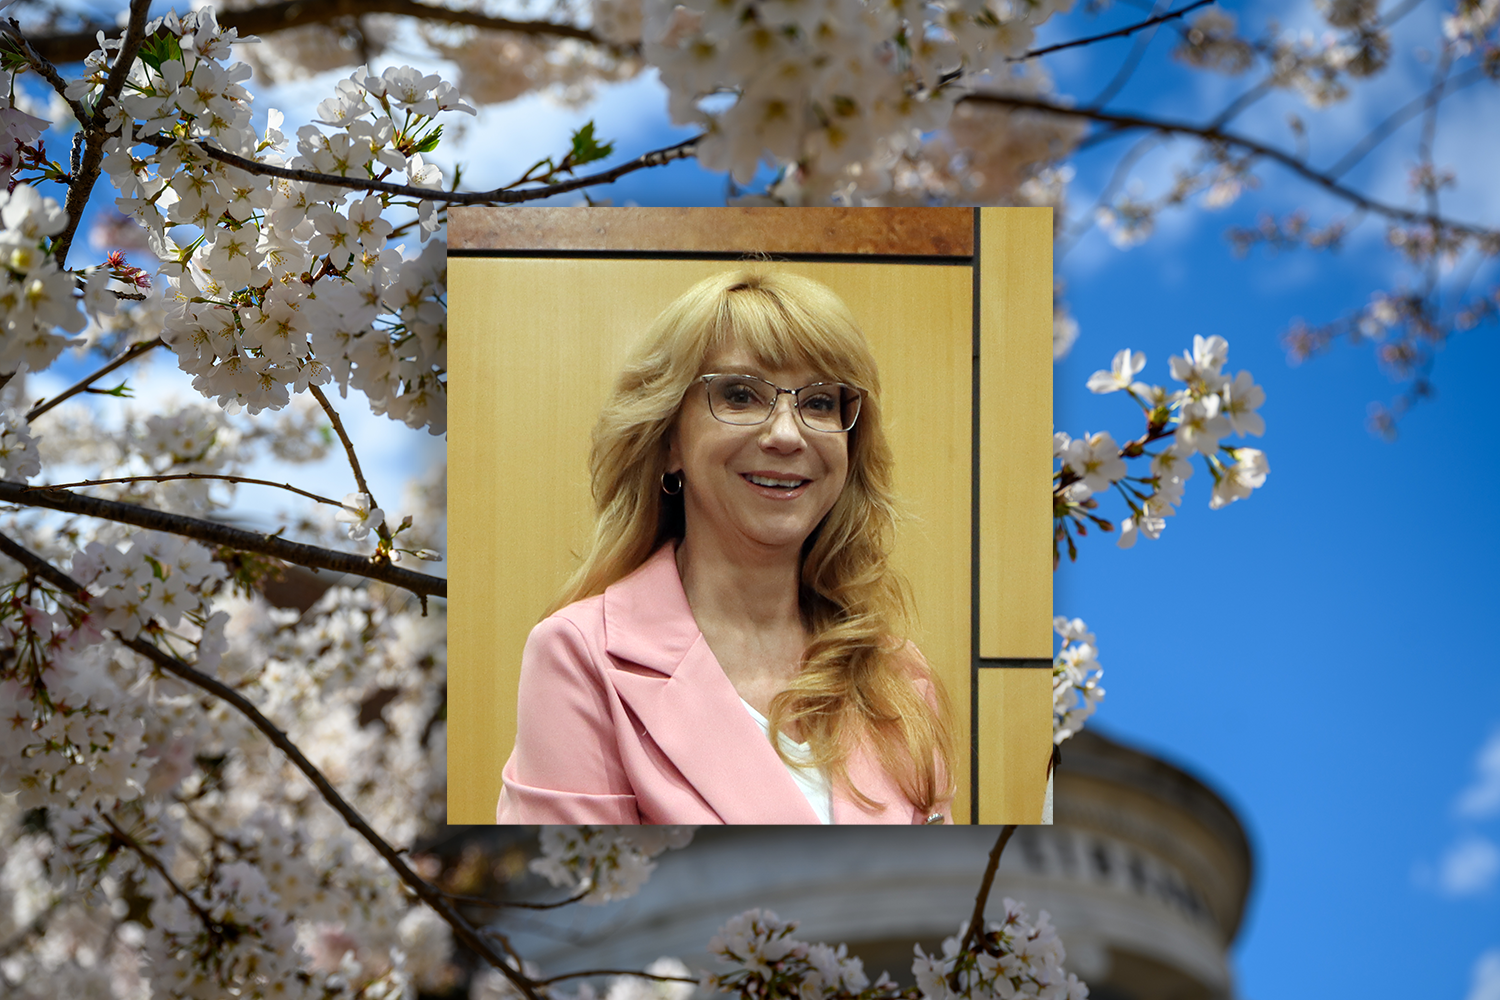 Kimberlianne Podlas with background of flowers on campus